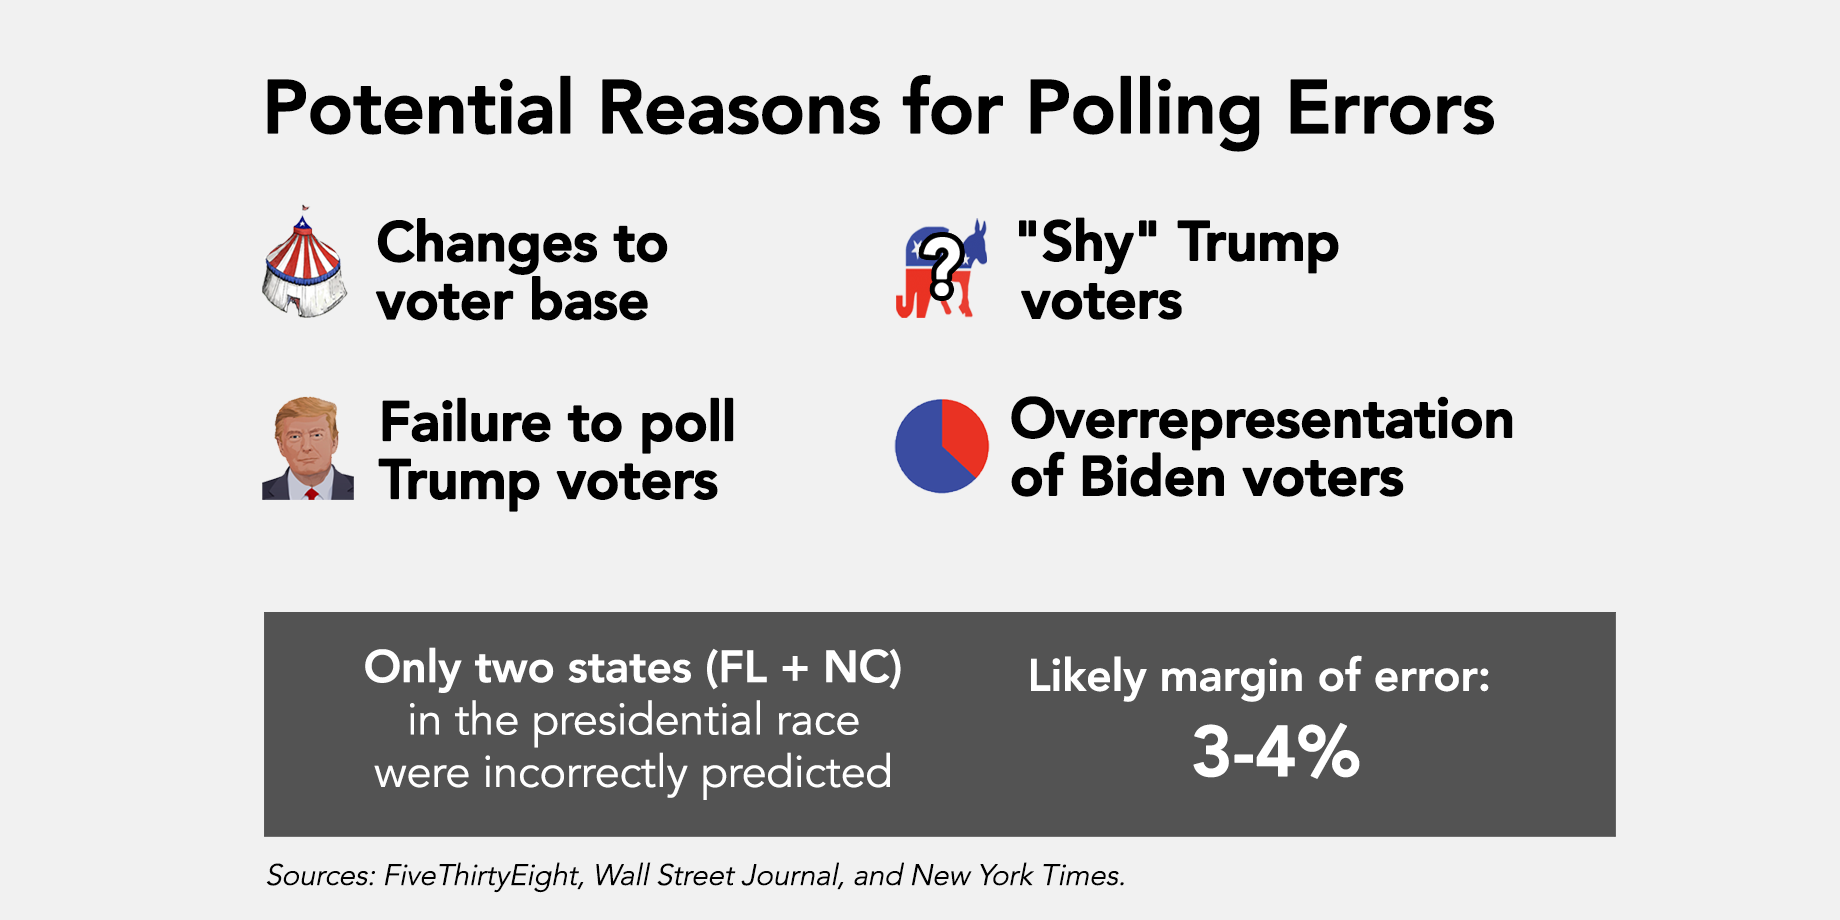 Why Were the Polls Wrong?